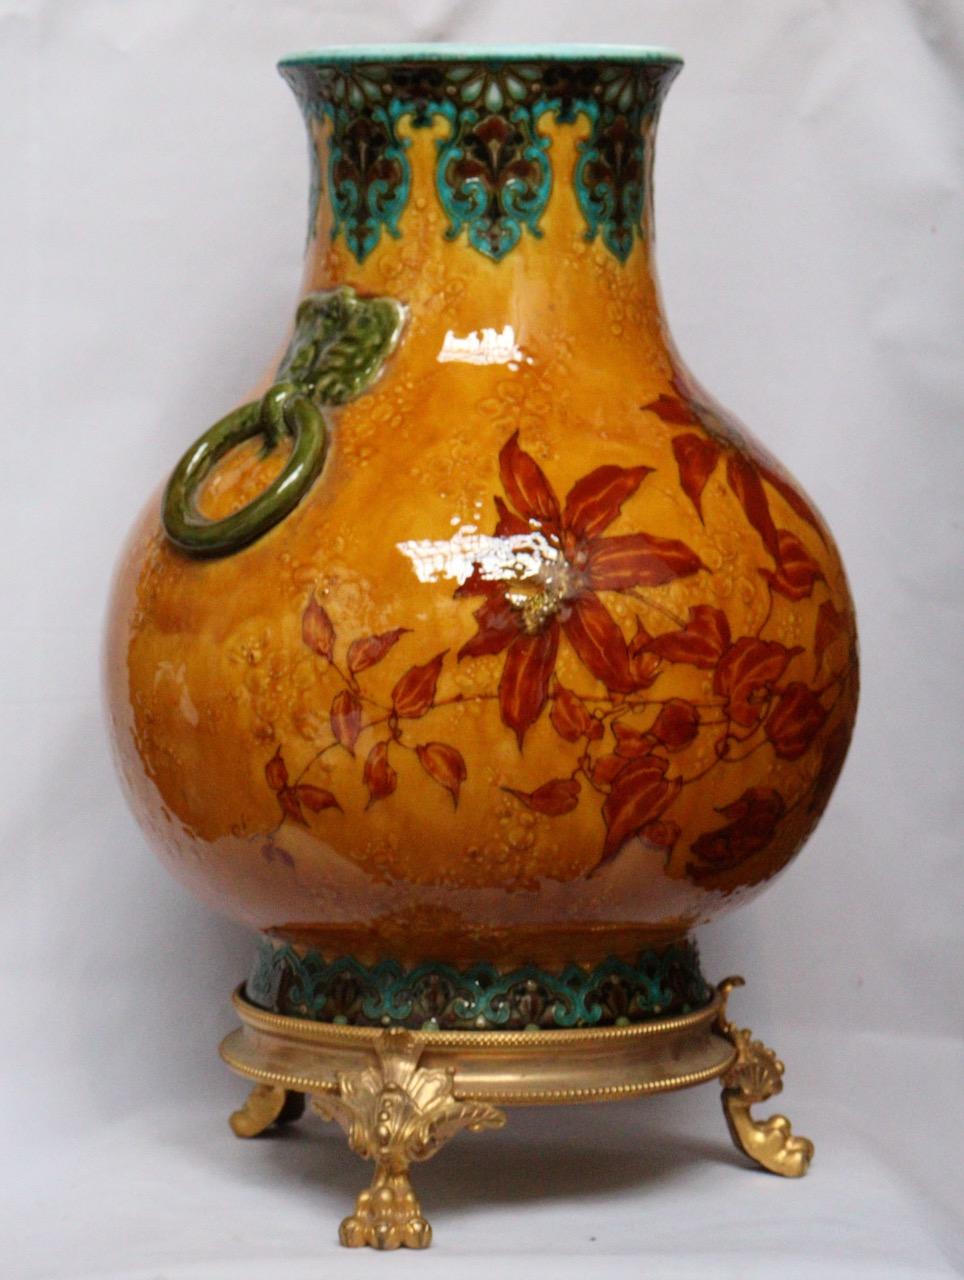 Optat Milet (1838-1911) Sèvres
An Aesthetic Mouvement Ormolu-Mounted and Faïence Vase 
Polychromed Enamelled Faïence designed with bunch of flowers on an orange gold ground
On an three pawn feet gilt bronze base
Signed on the body Emile Diffloth